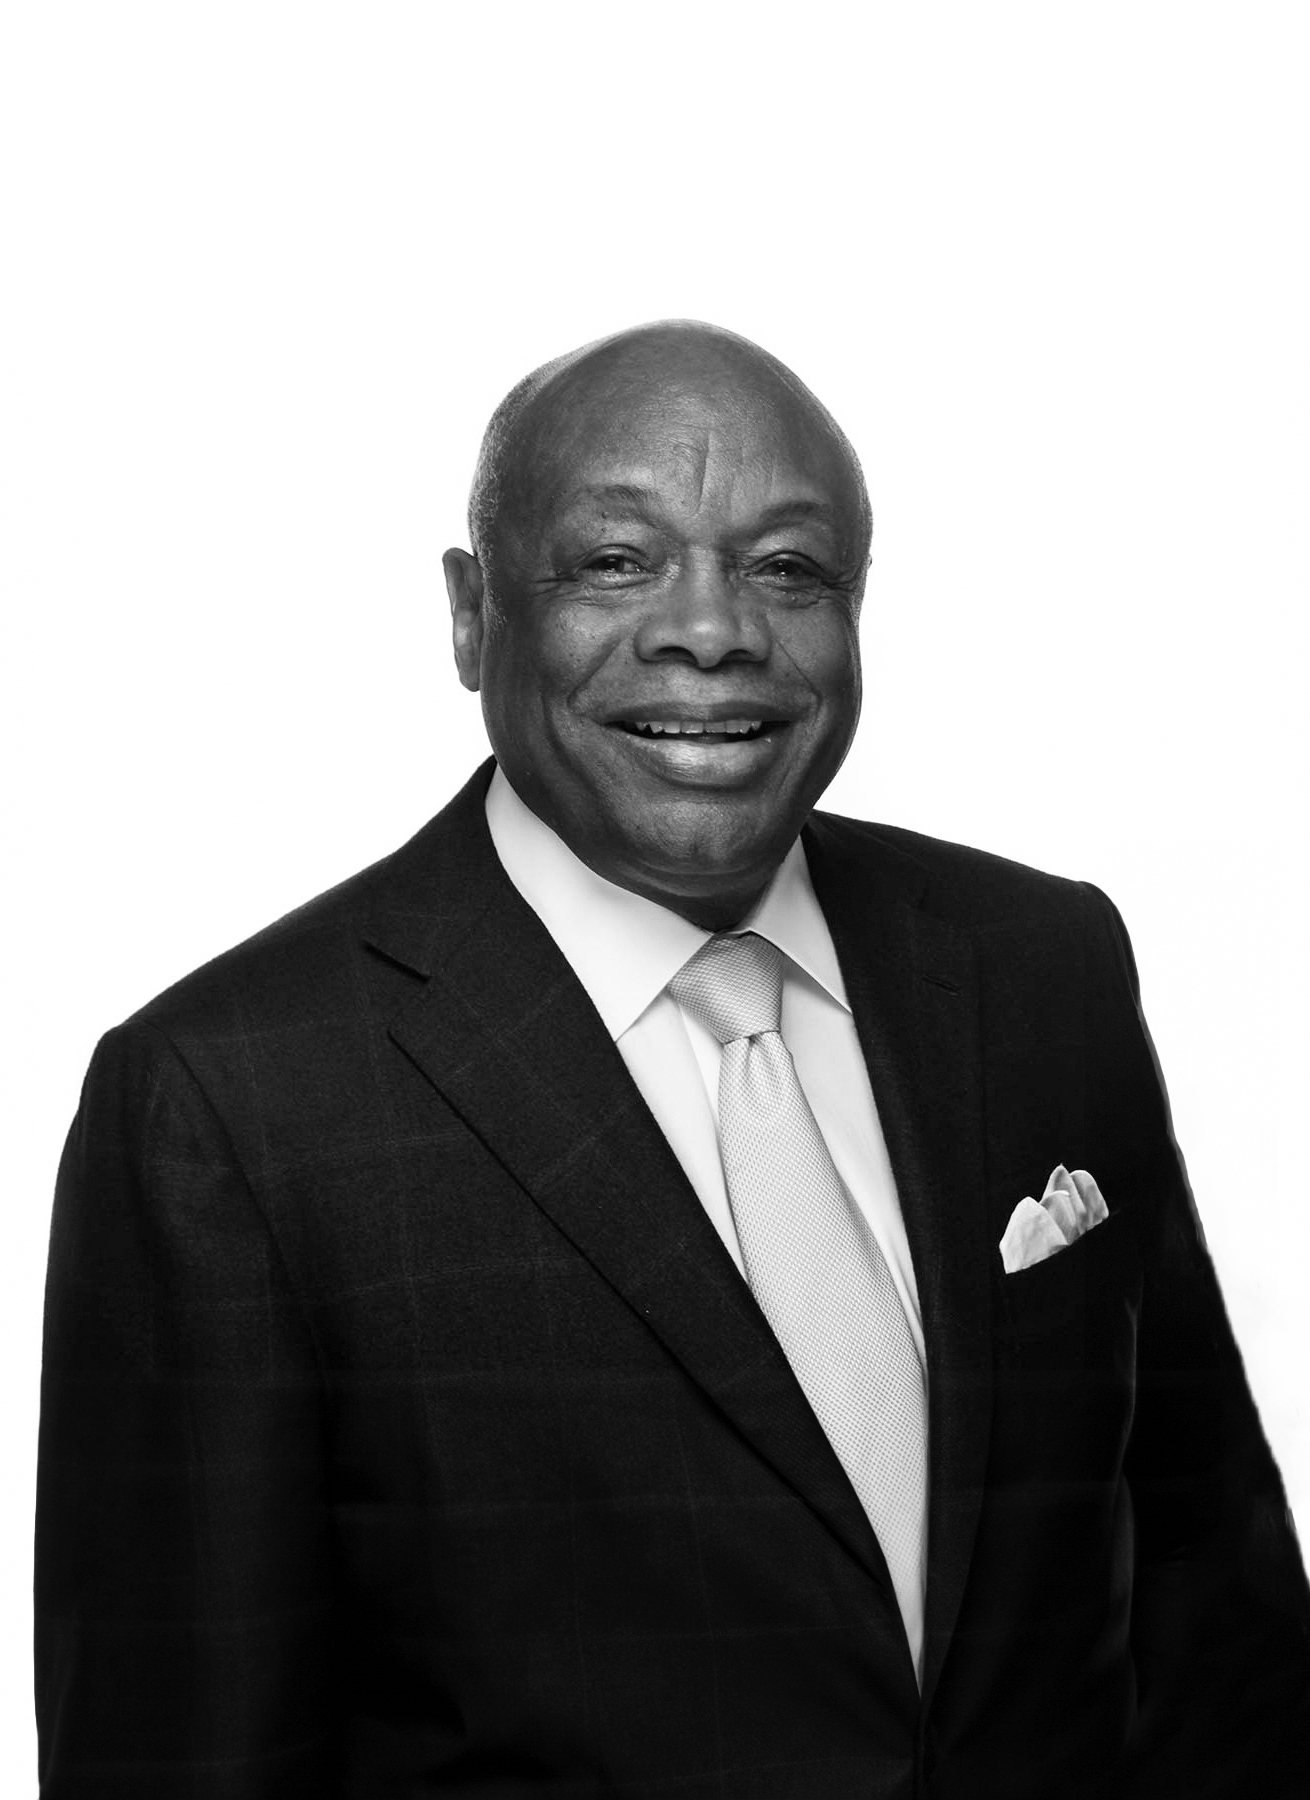 Headshot of a smiling Willie L. Brown Jr. wearing a dark suit.